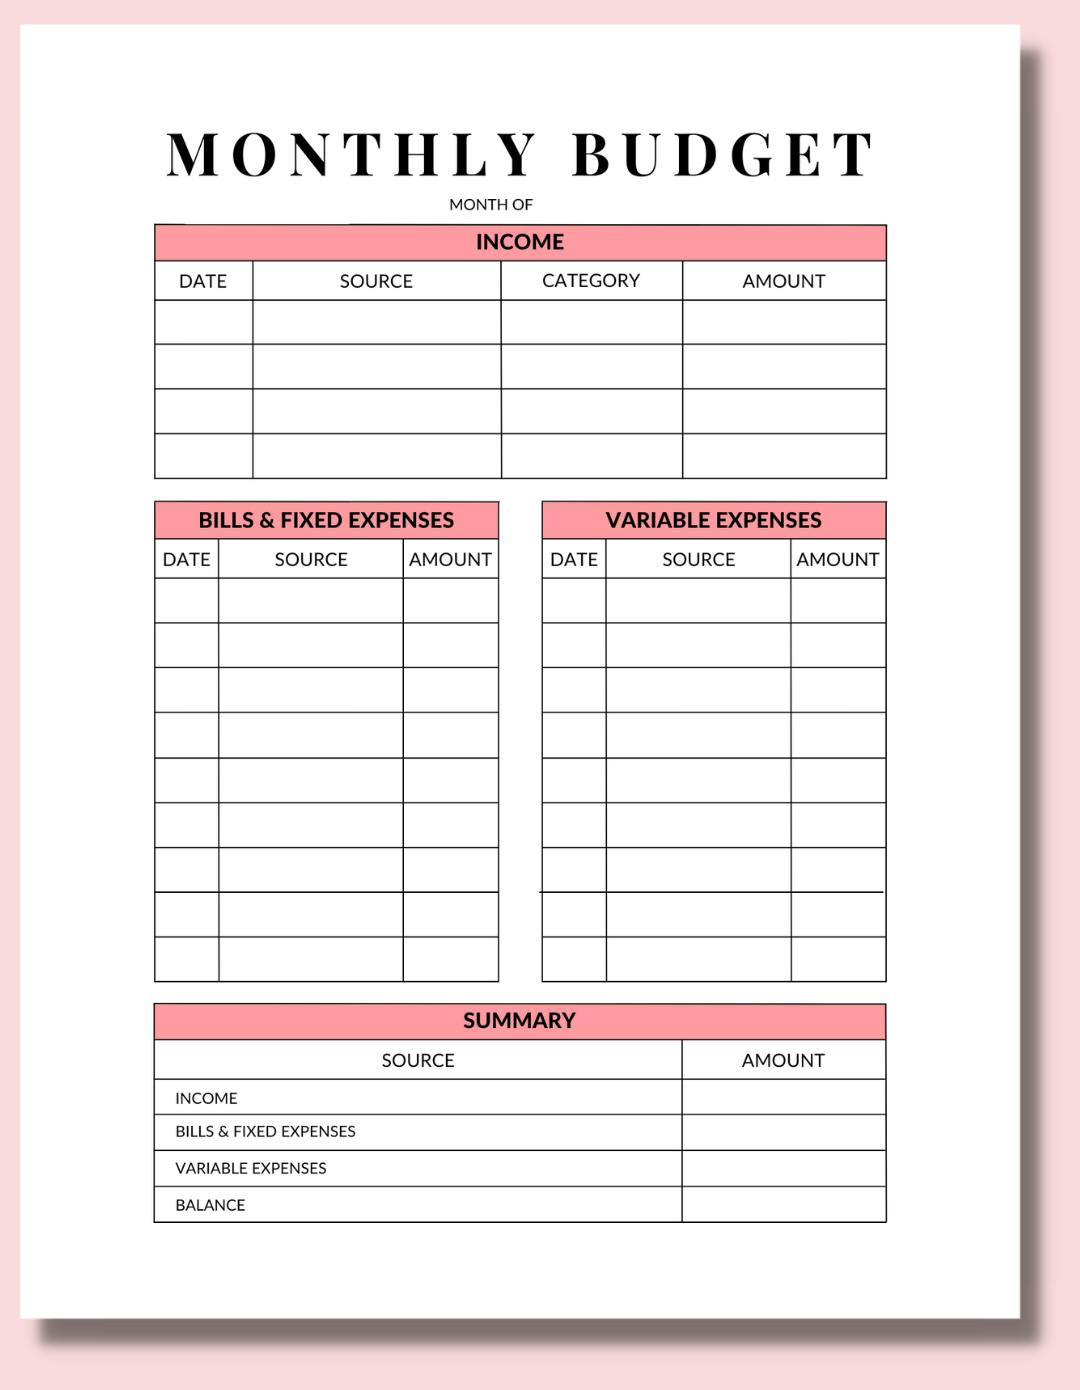 Get my free Monthly Budget Template